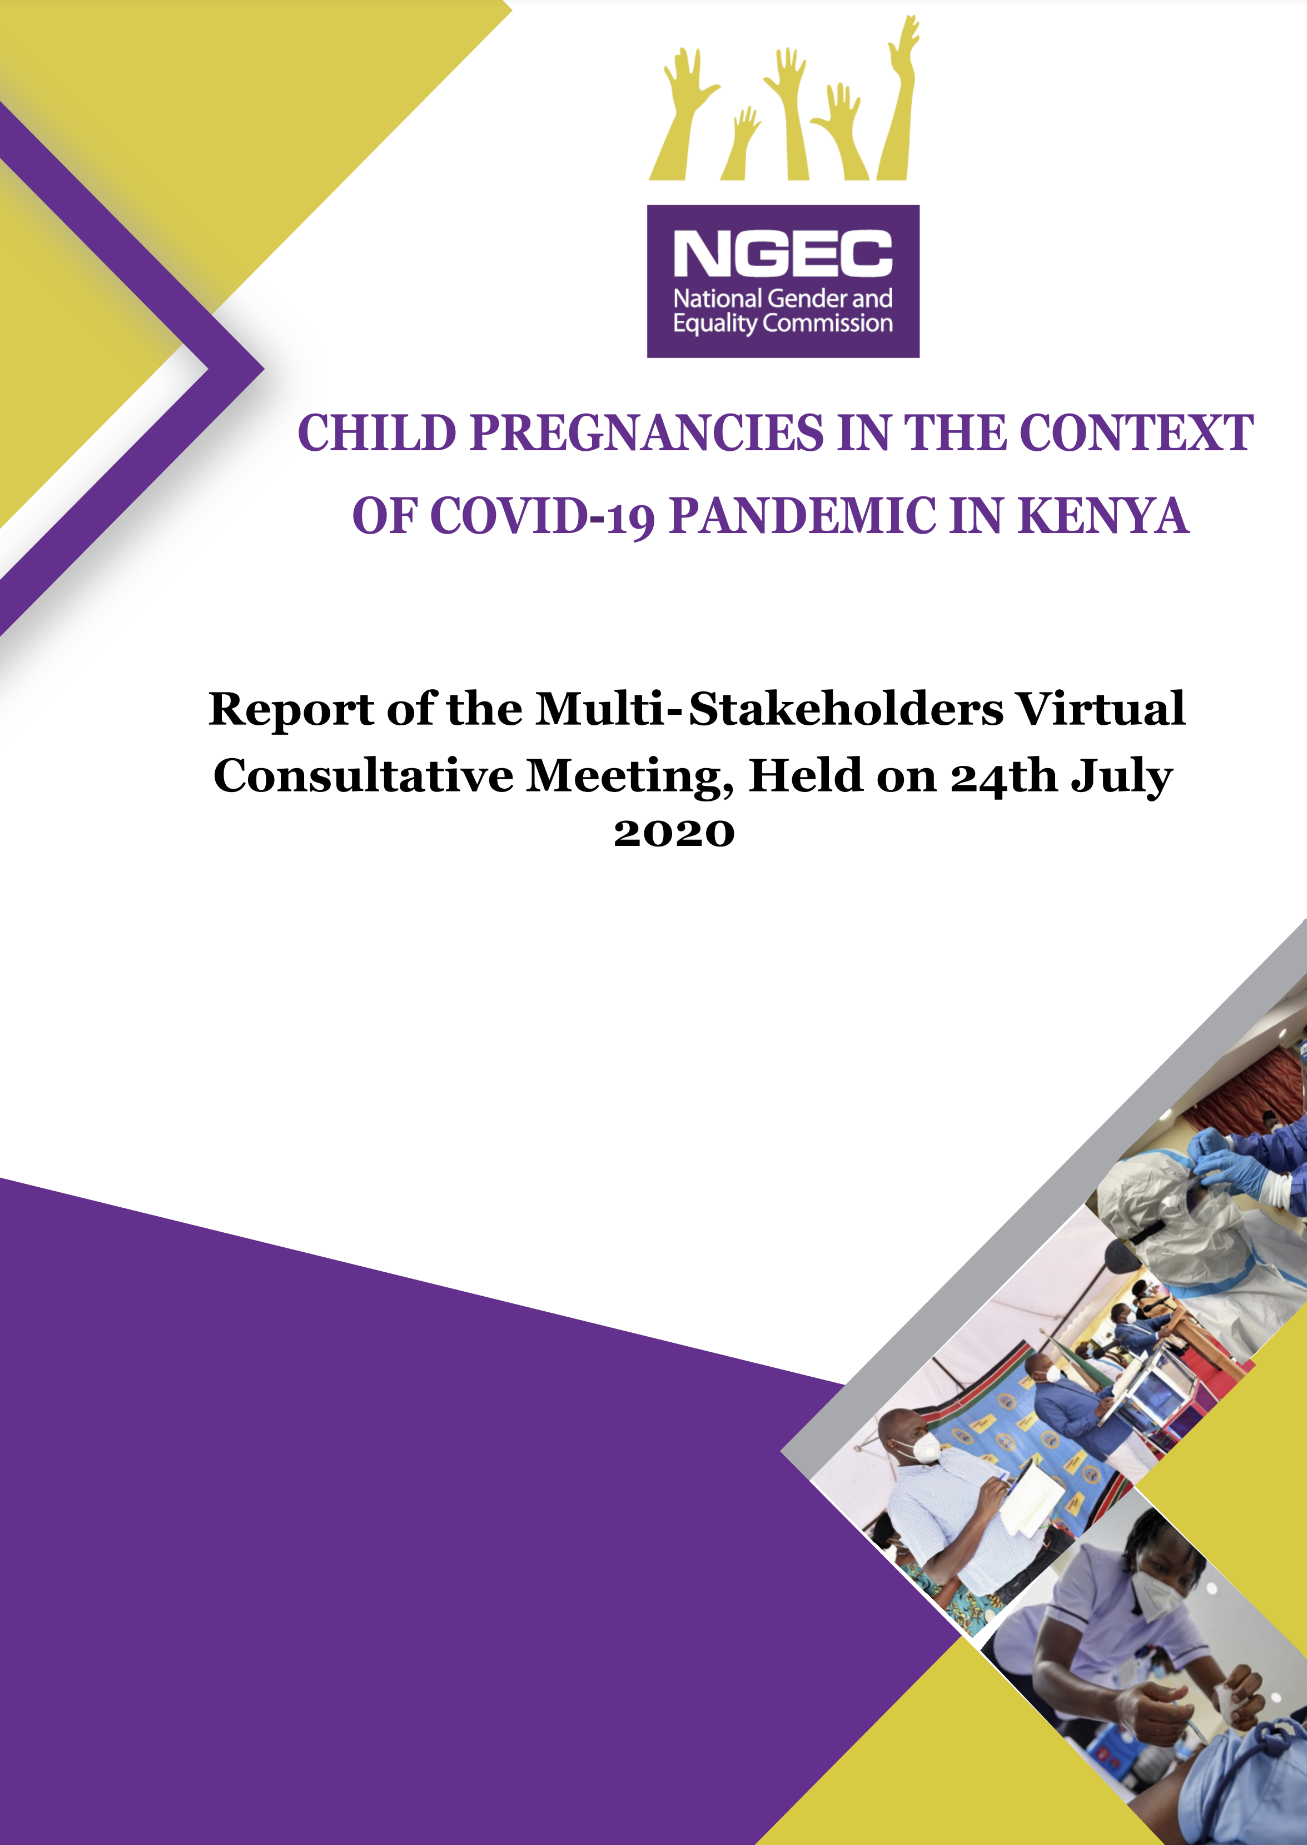 CHILD PREGNANCIES IN THE CONTEXT OF COVID-19 PANDEMIC IN KENYA